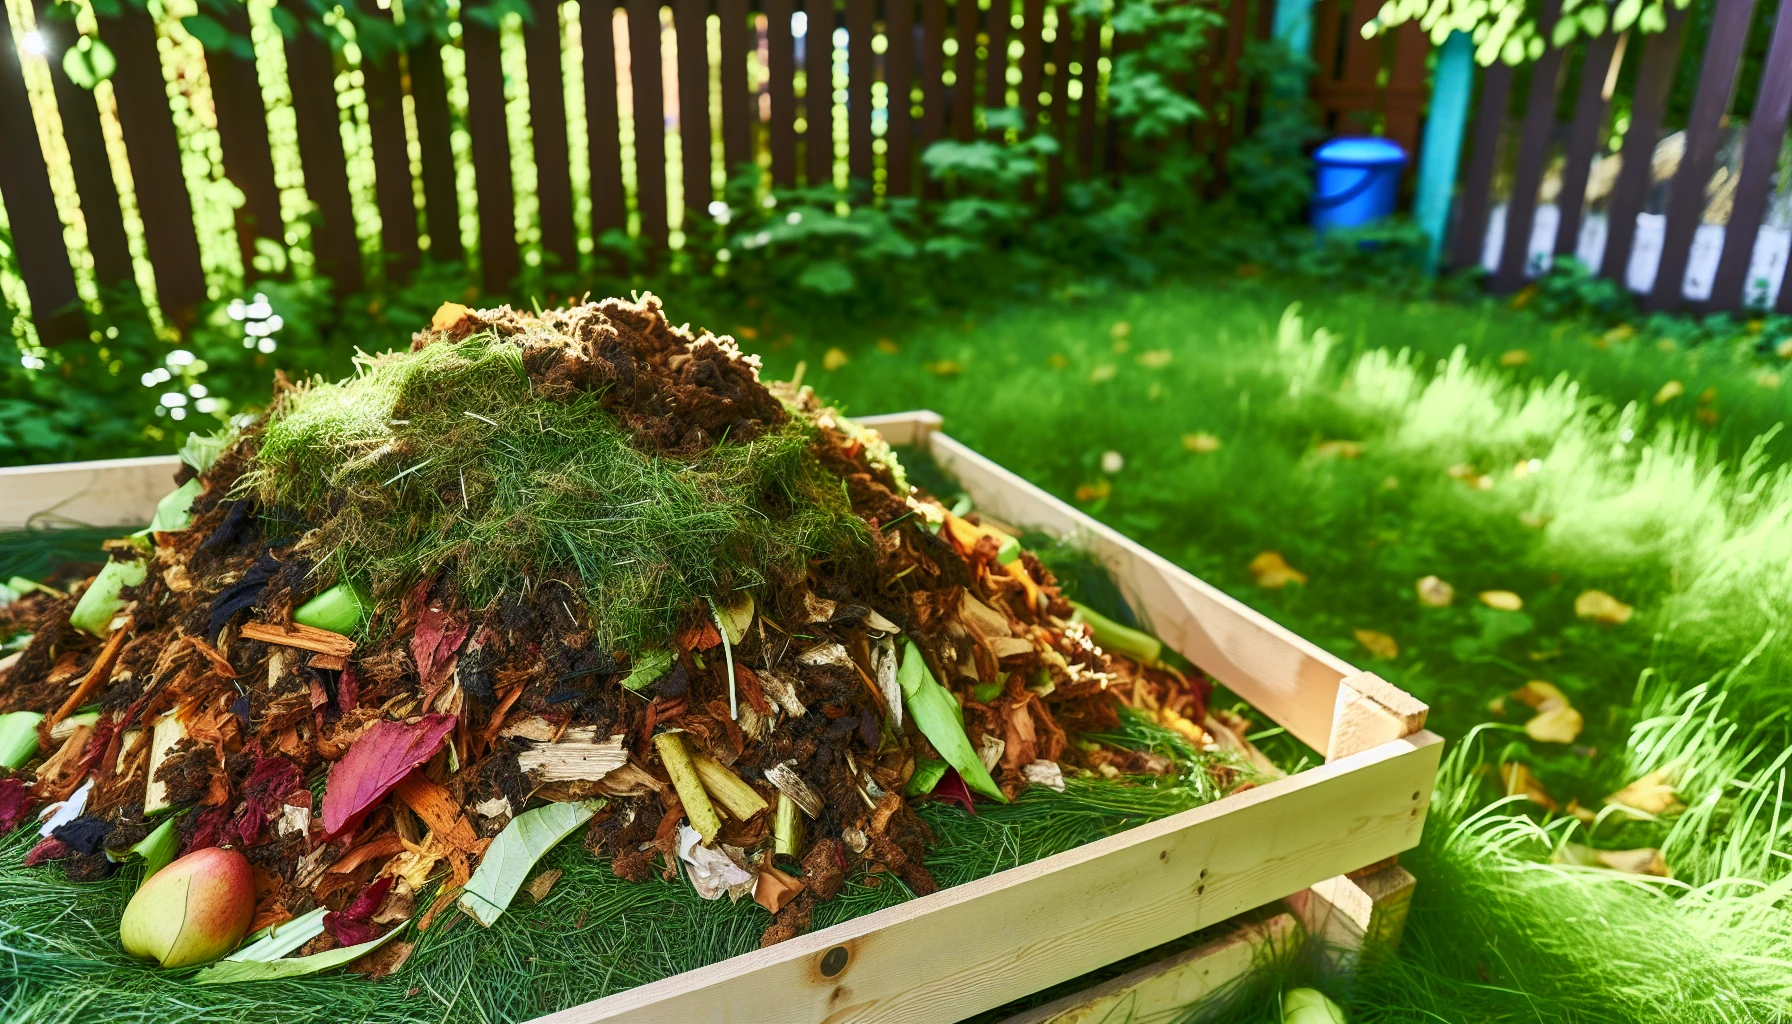 Homemade compost heap with organic materials